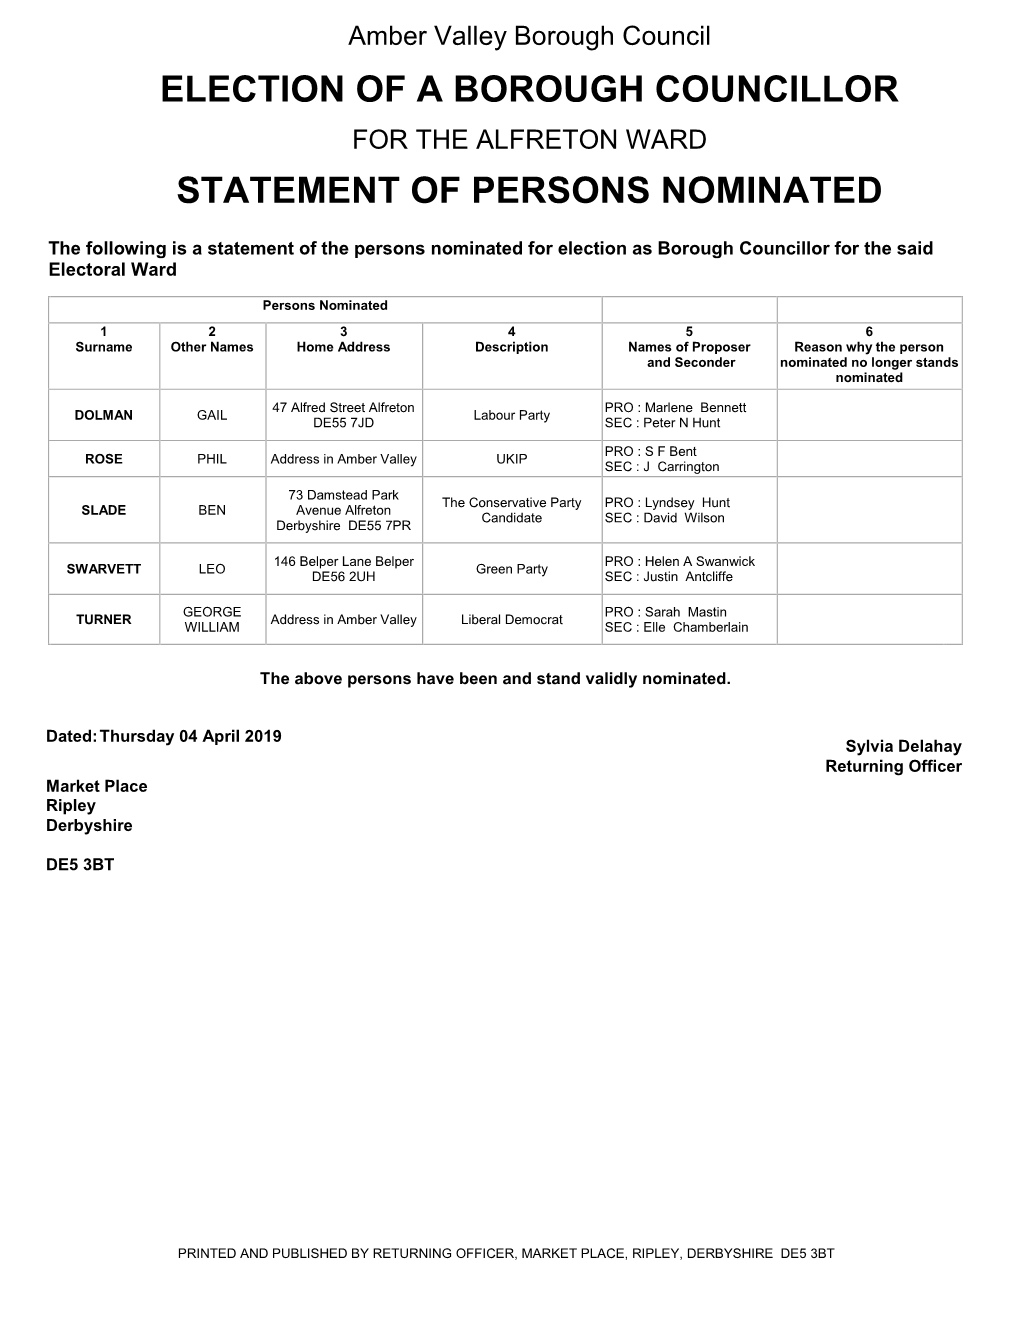 Statement of Persons Nominated